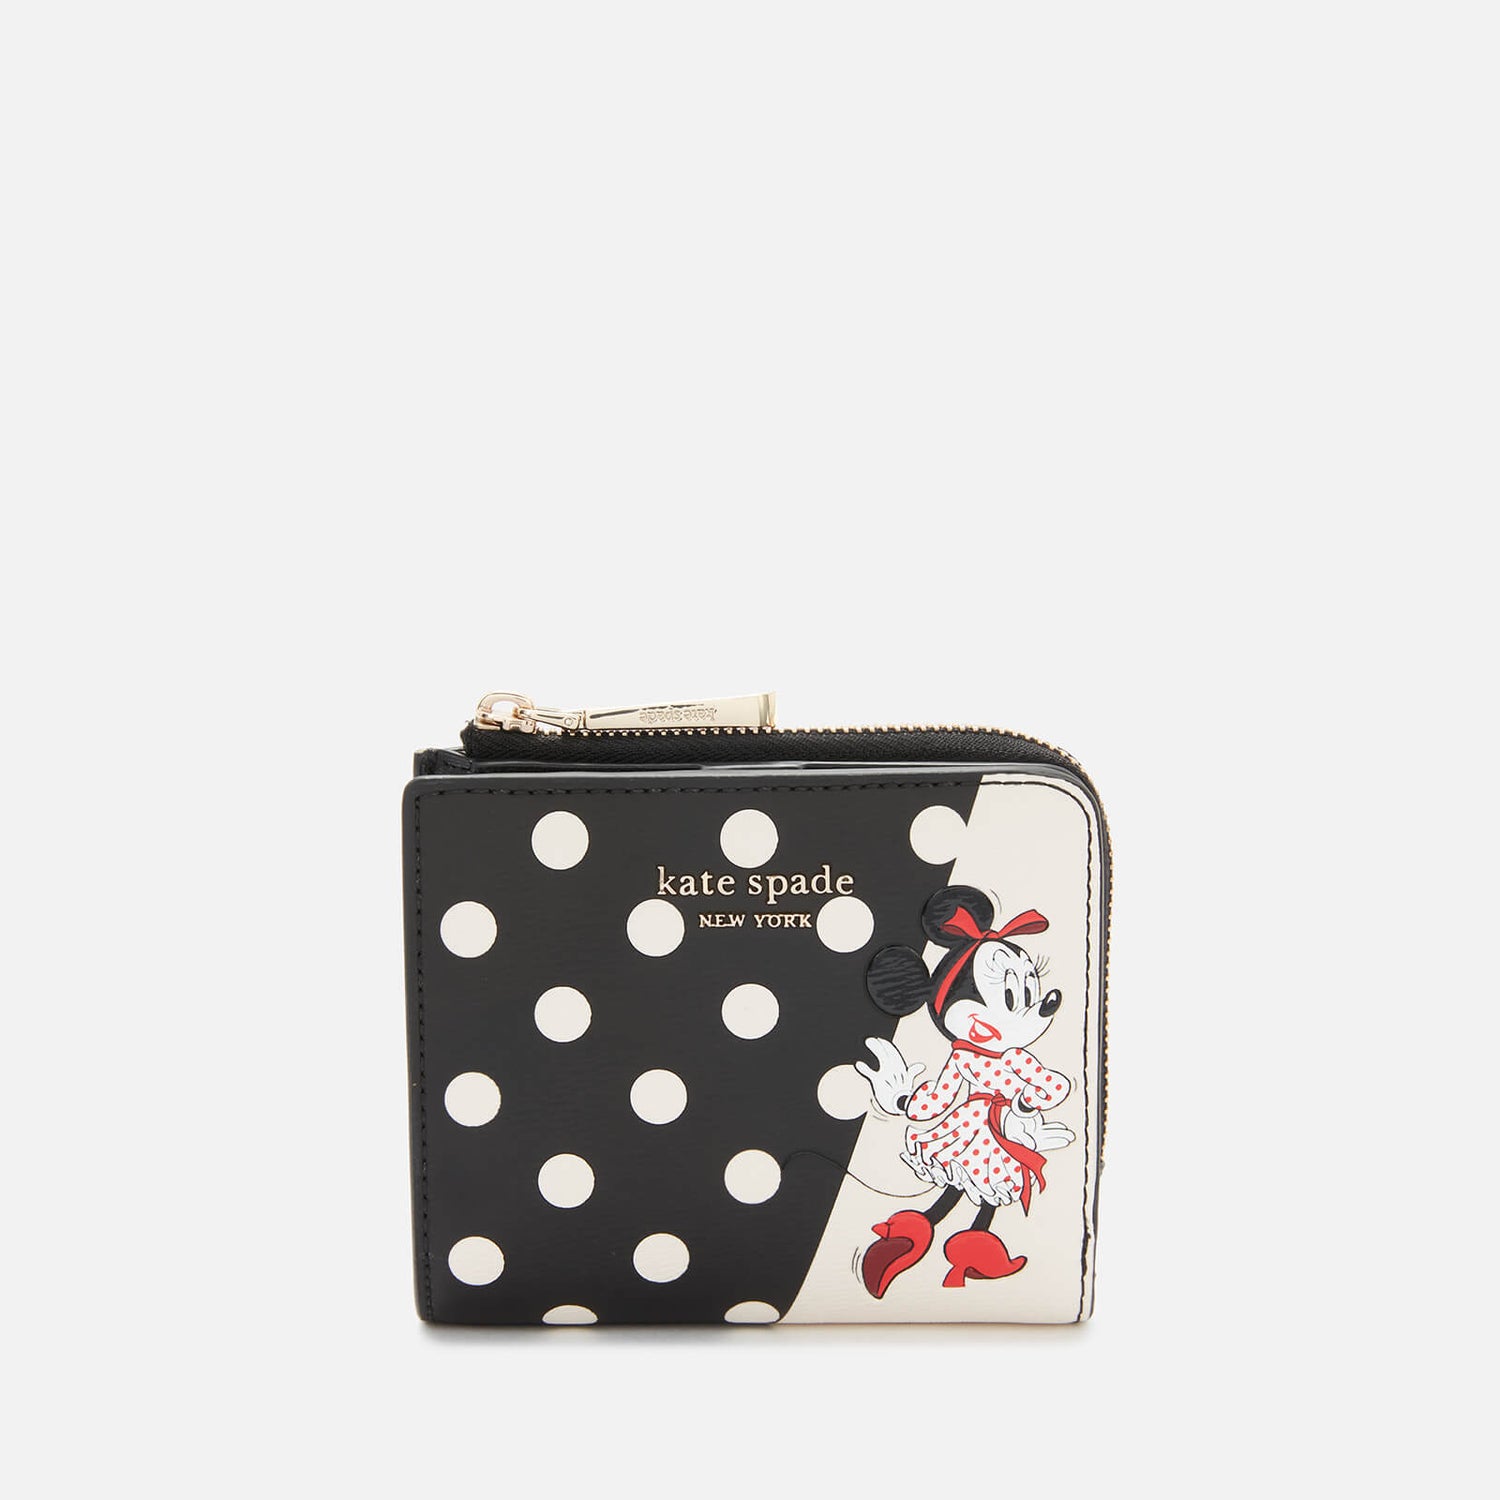 Kate Spade New York Women's Minnie Mouse Small Bifold Wallet - Black Multi